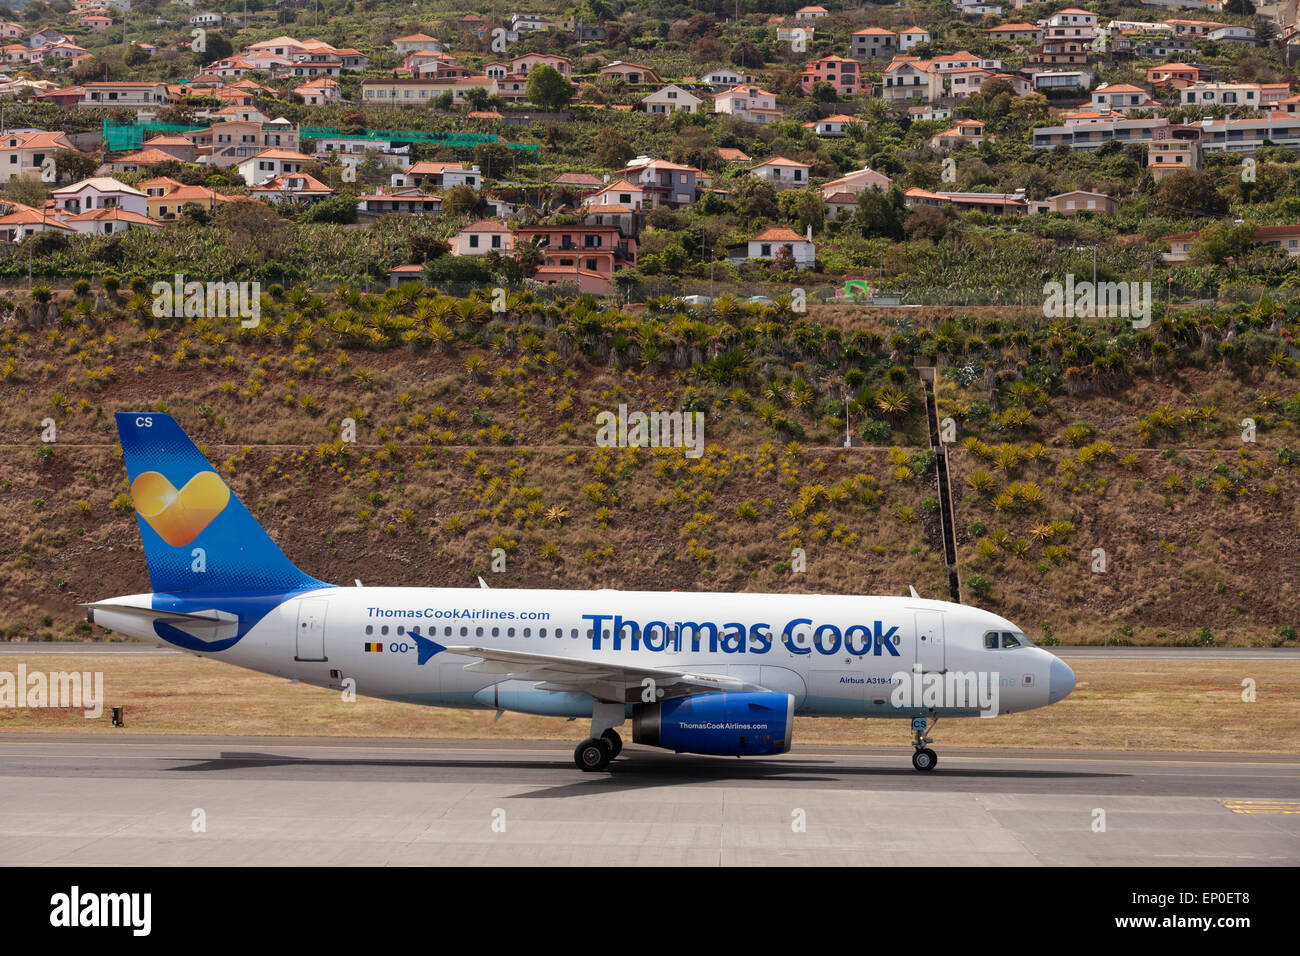 A Thomas Cook Airlines Airbus A319-100 plane at Funchal airport, Madeira, Europe Stock Photo